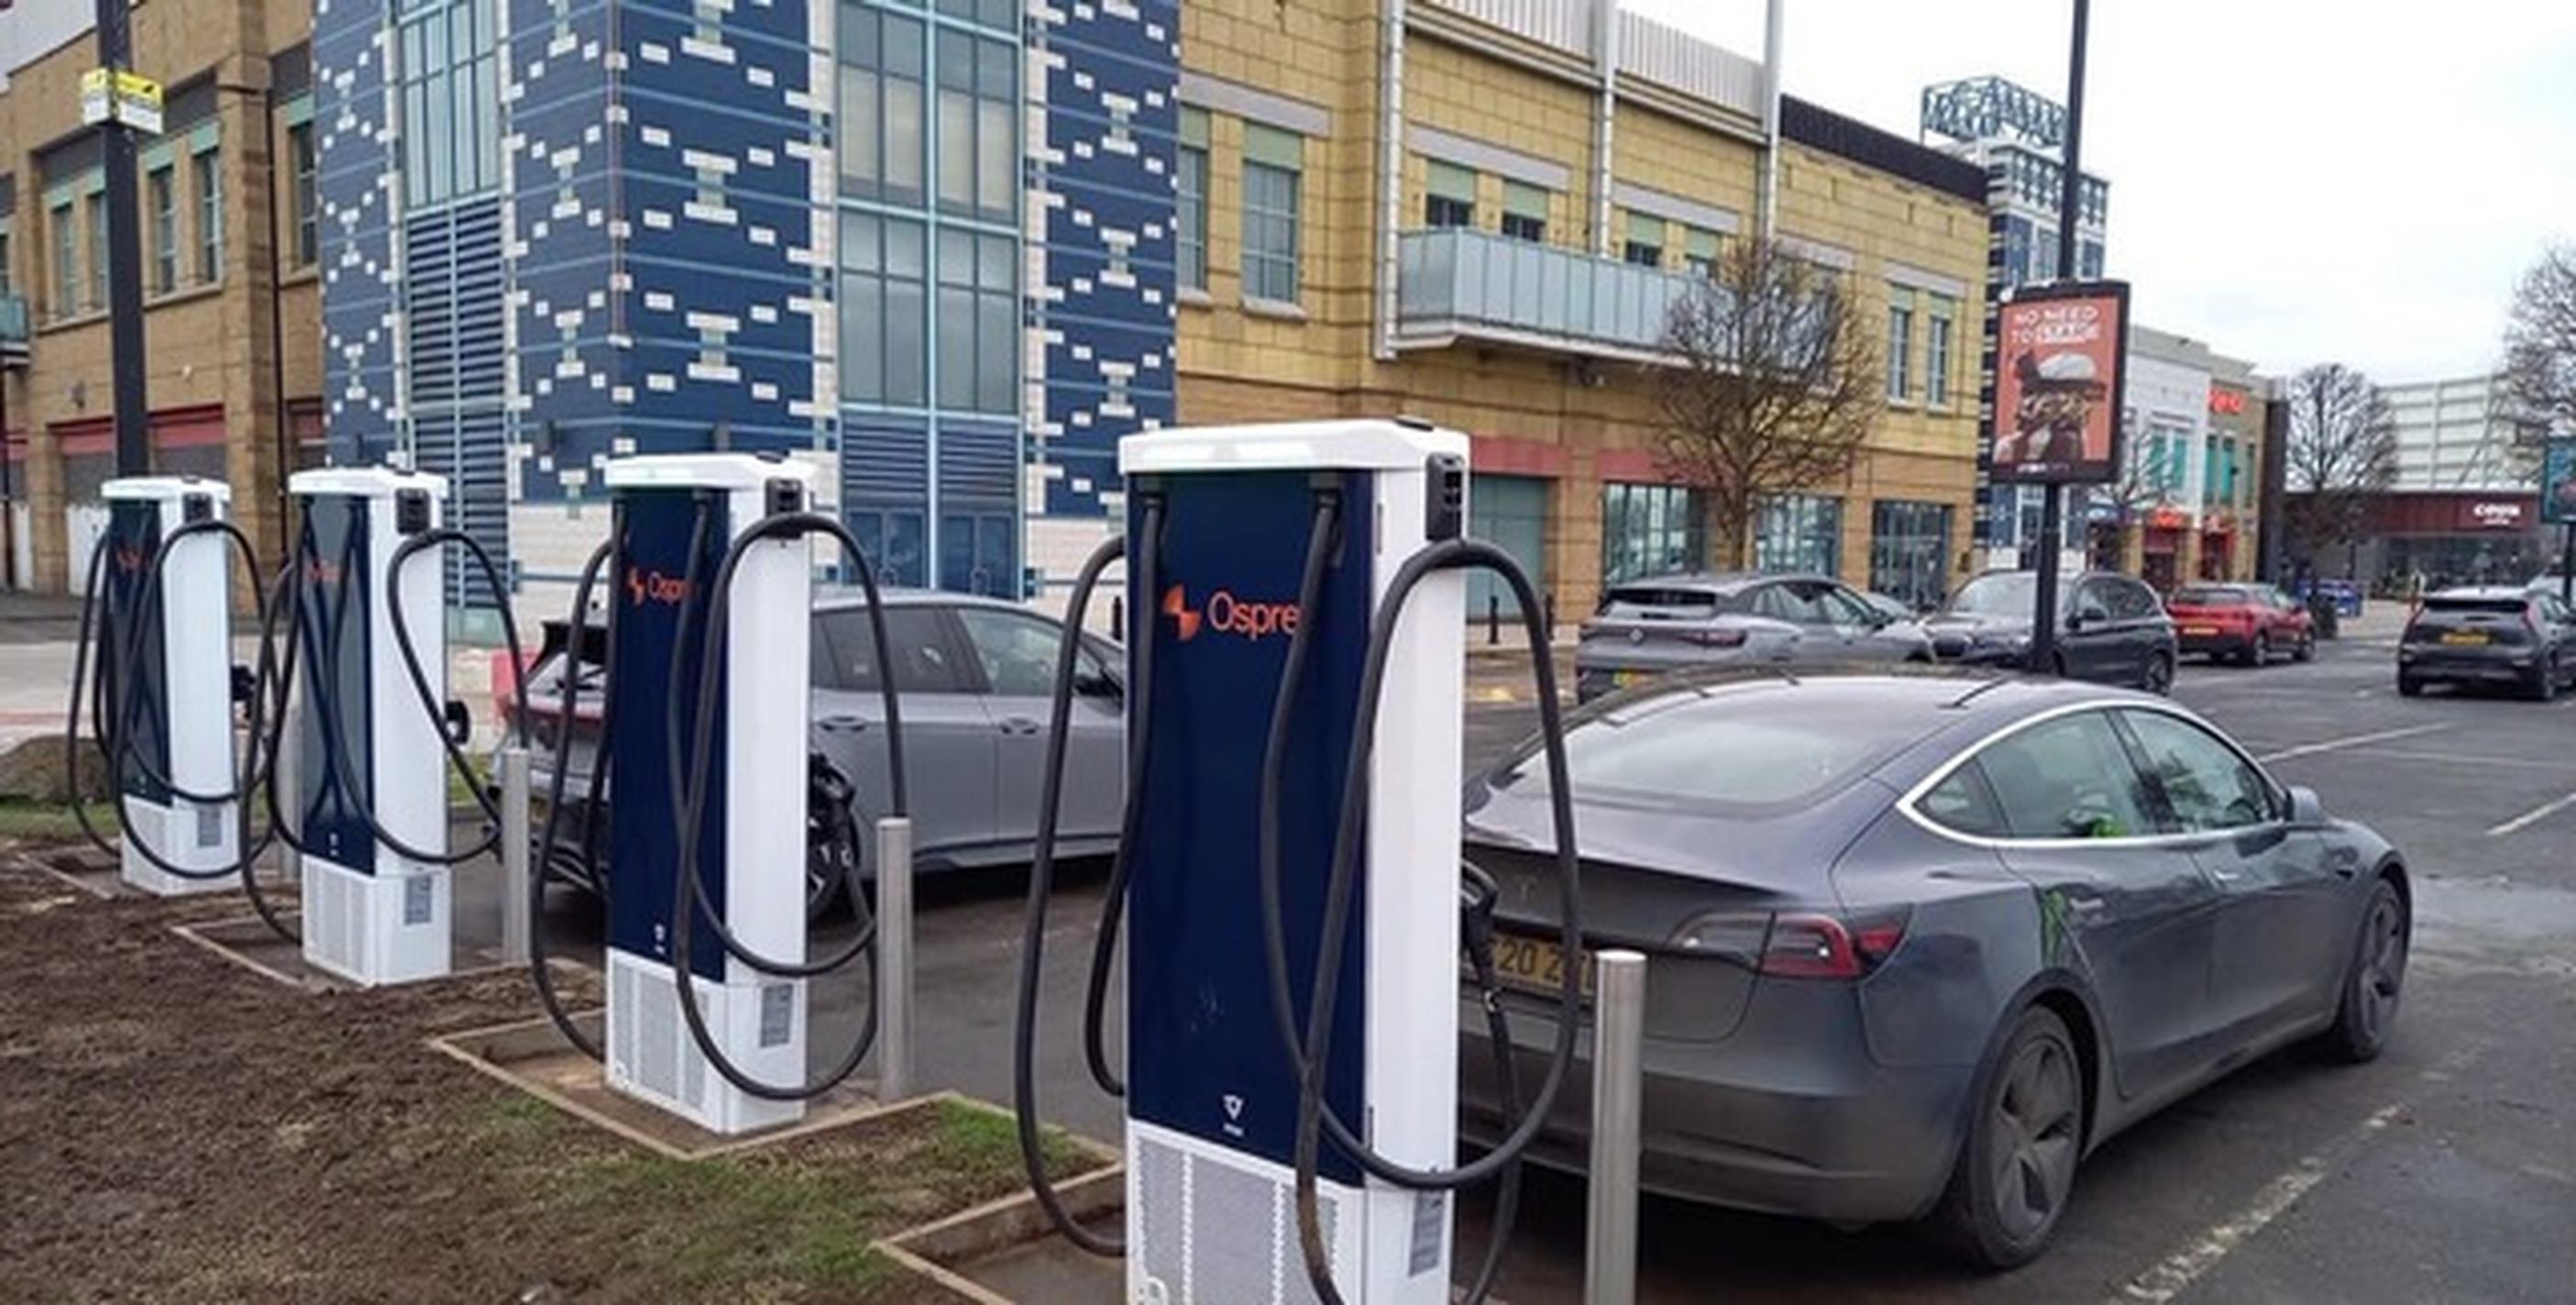 Osprey rapid chargers at Star City